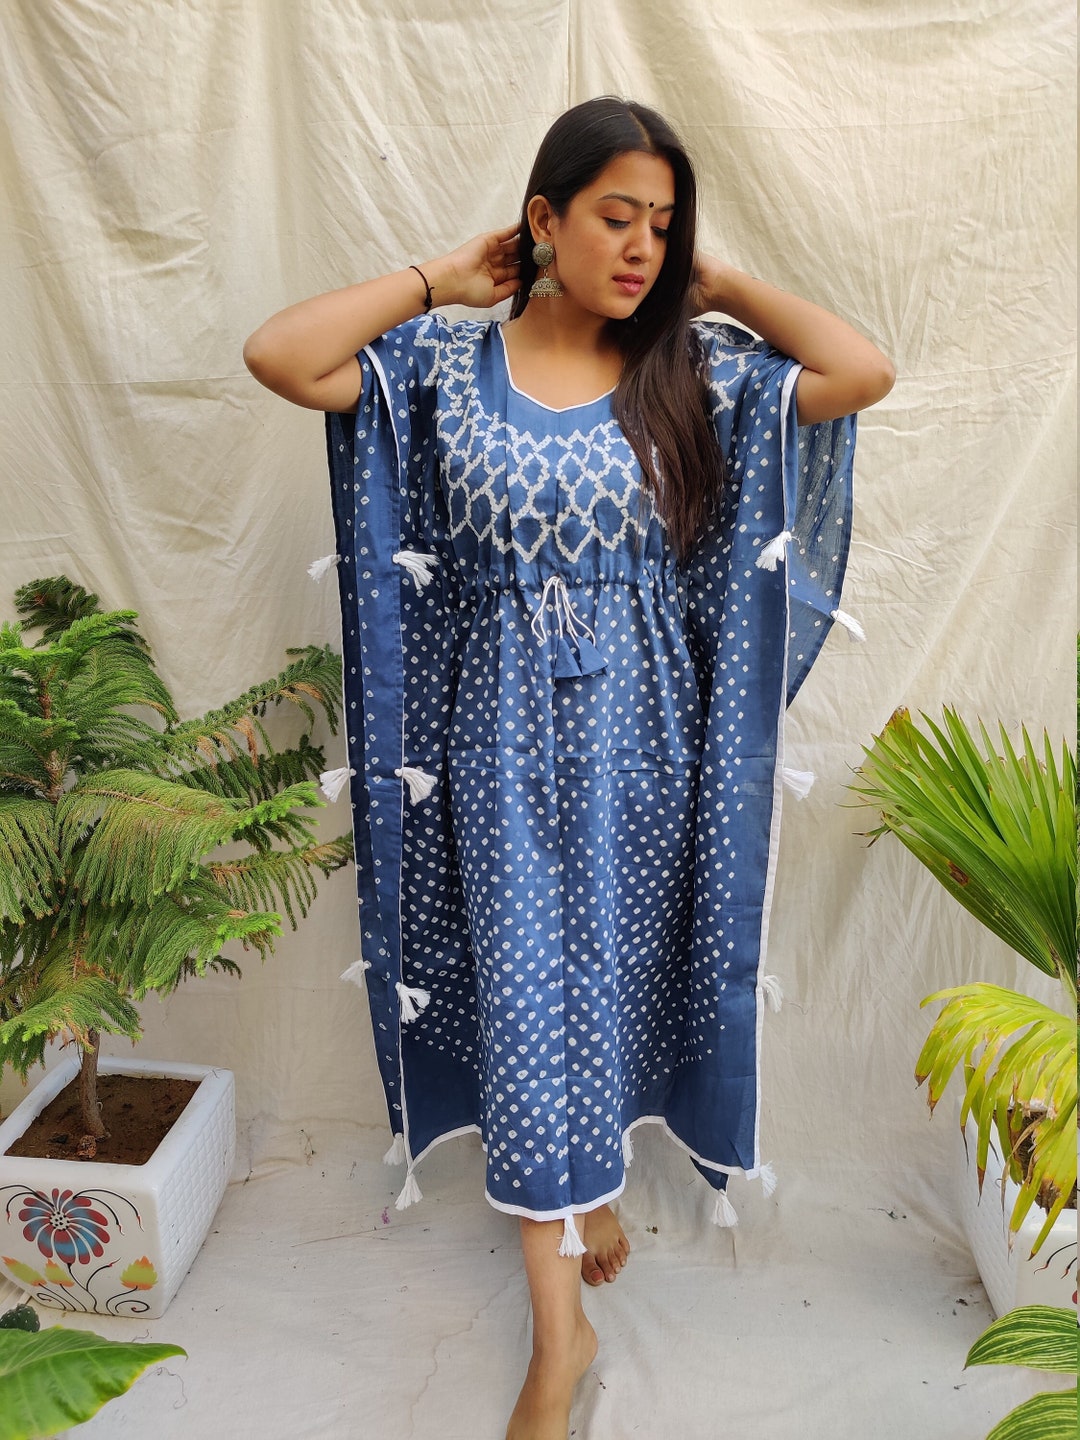 Shop Now Plus Size Pink Floral Printed Tunic Tops For Women - ADIRICHA